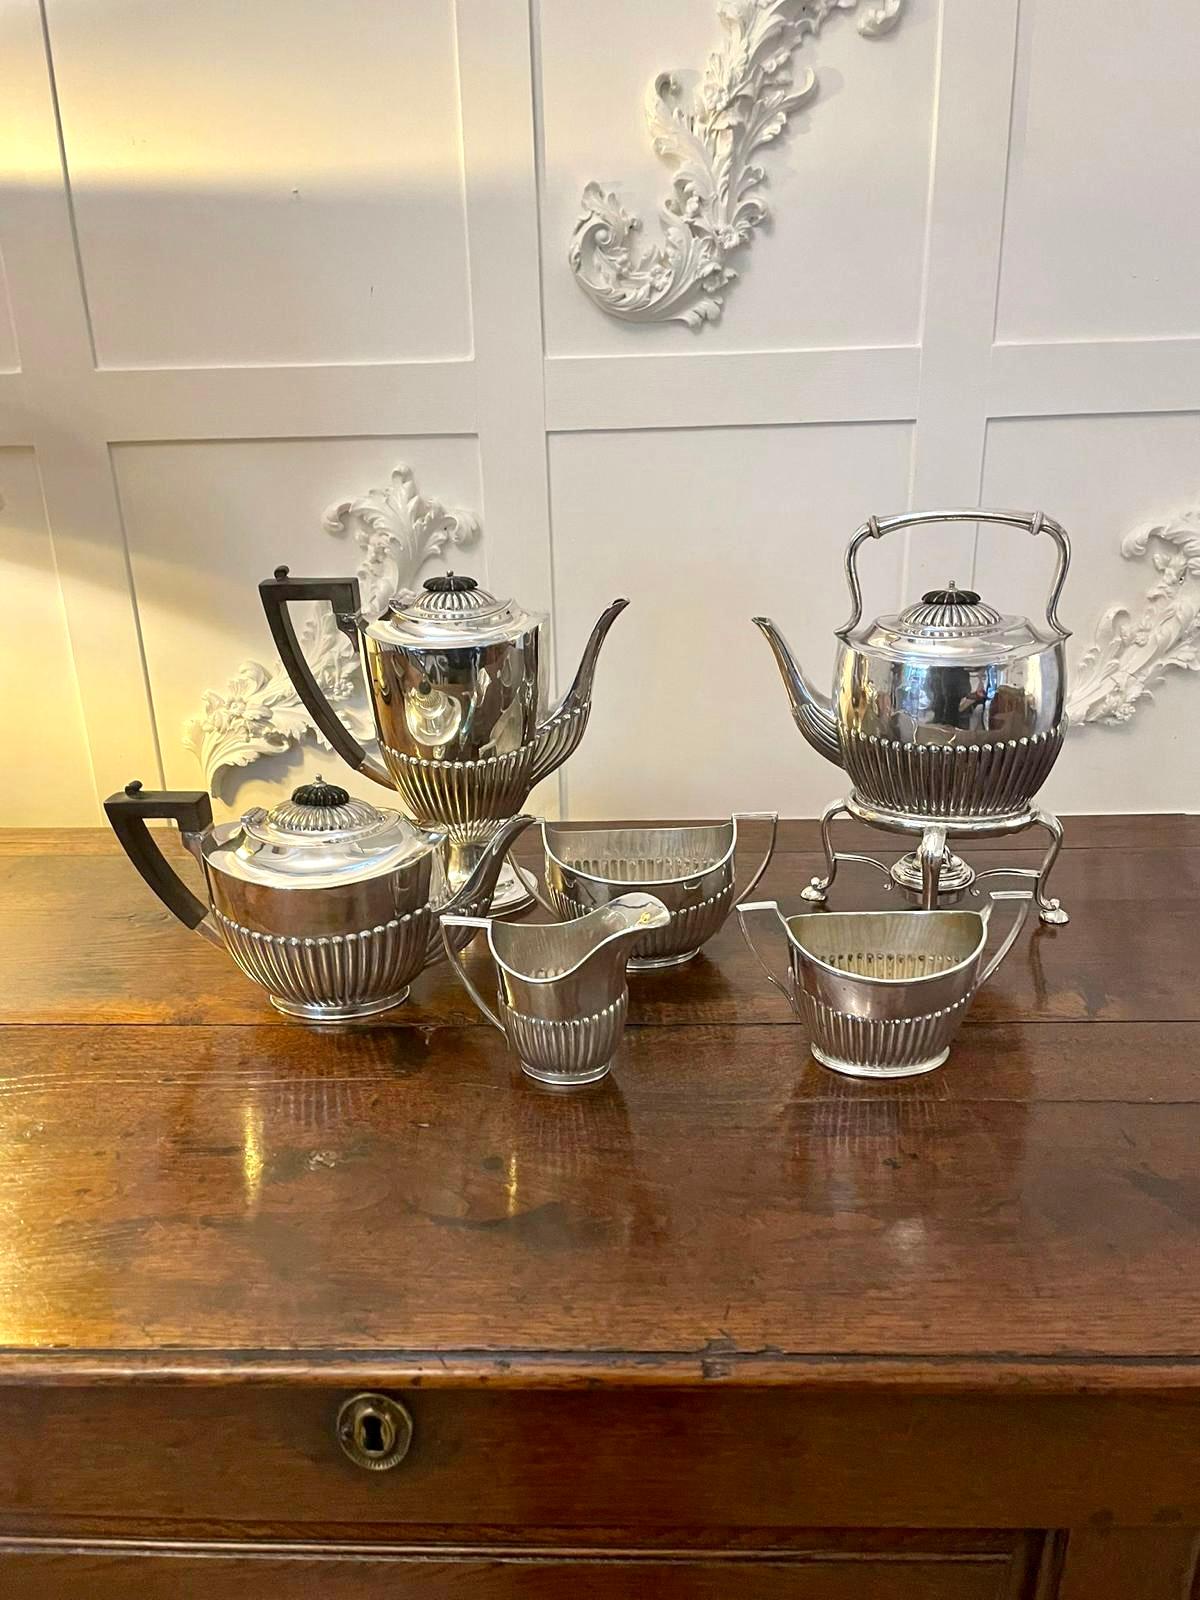 Unusual Antique Edwardian quality silver plated 6 piece tea set having a quality antique Edwardian 6 piece silver plate tea set consisting of a teapot, coffee pot, spirit kettle on stand, two sugar bowls and a milk jug 

In lovely original